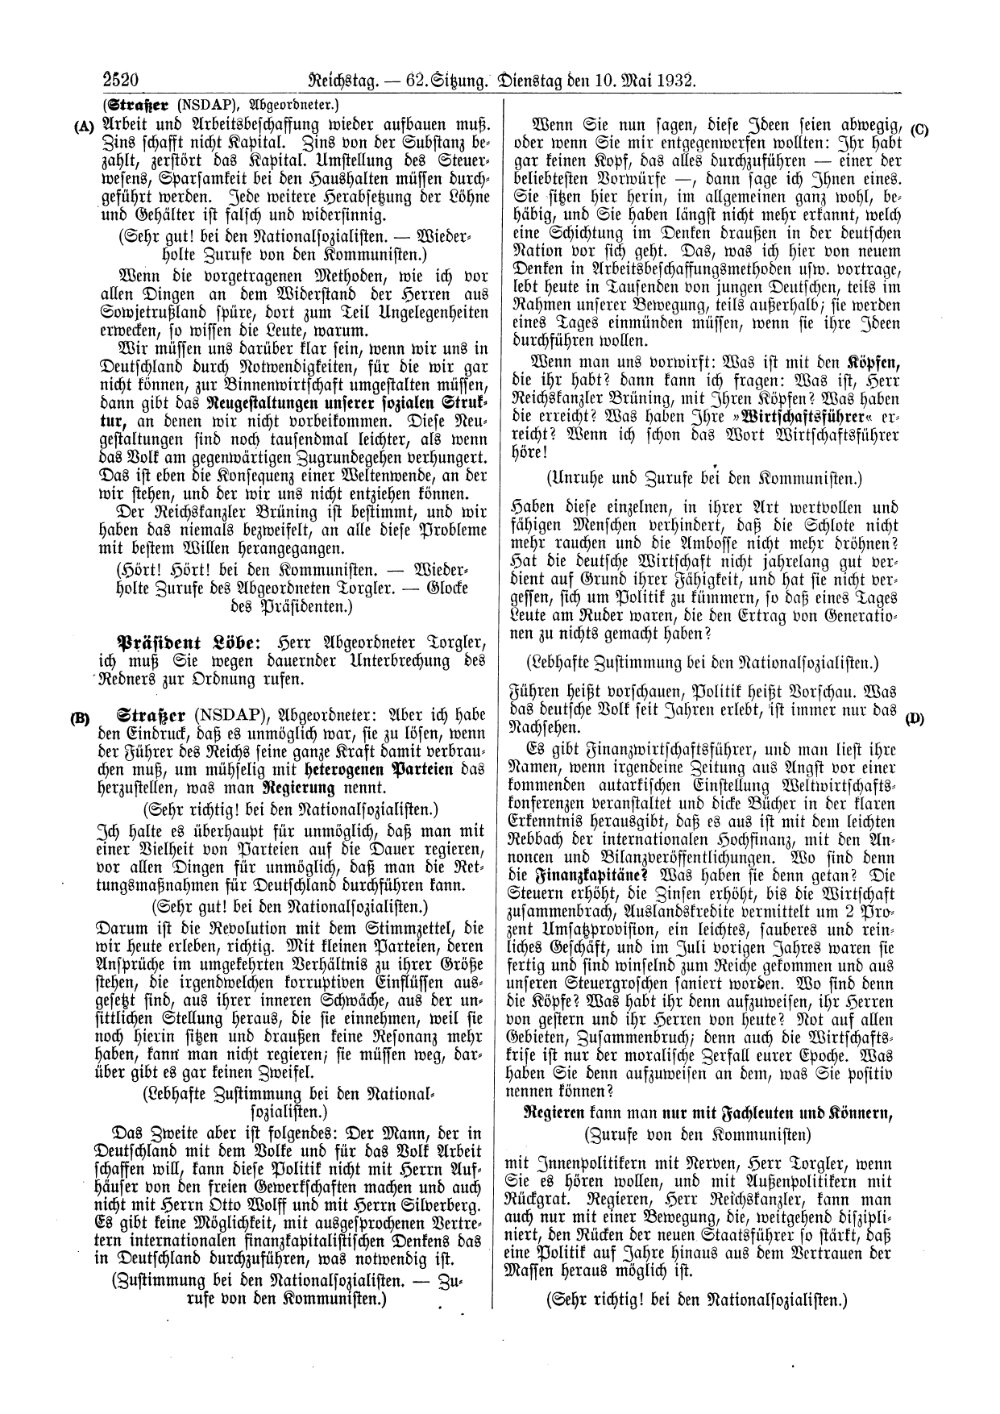 Scan of page 2520